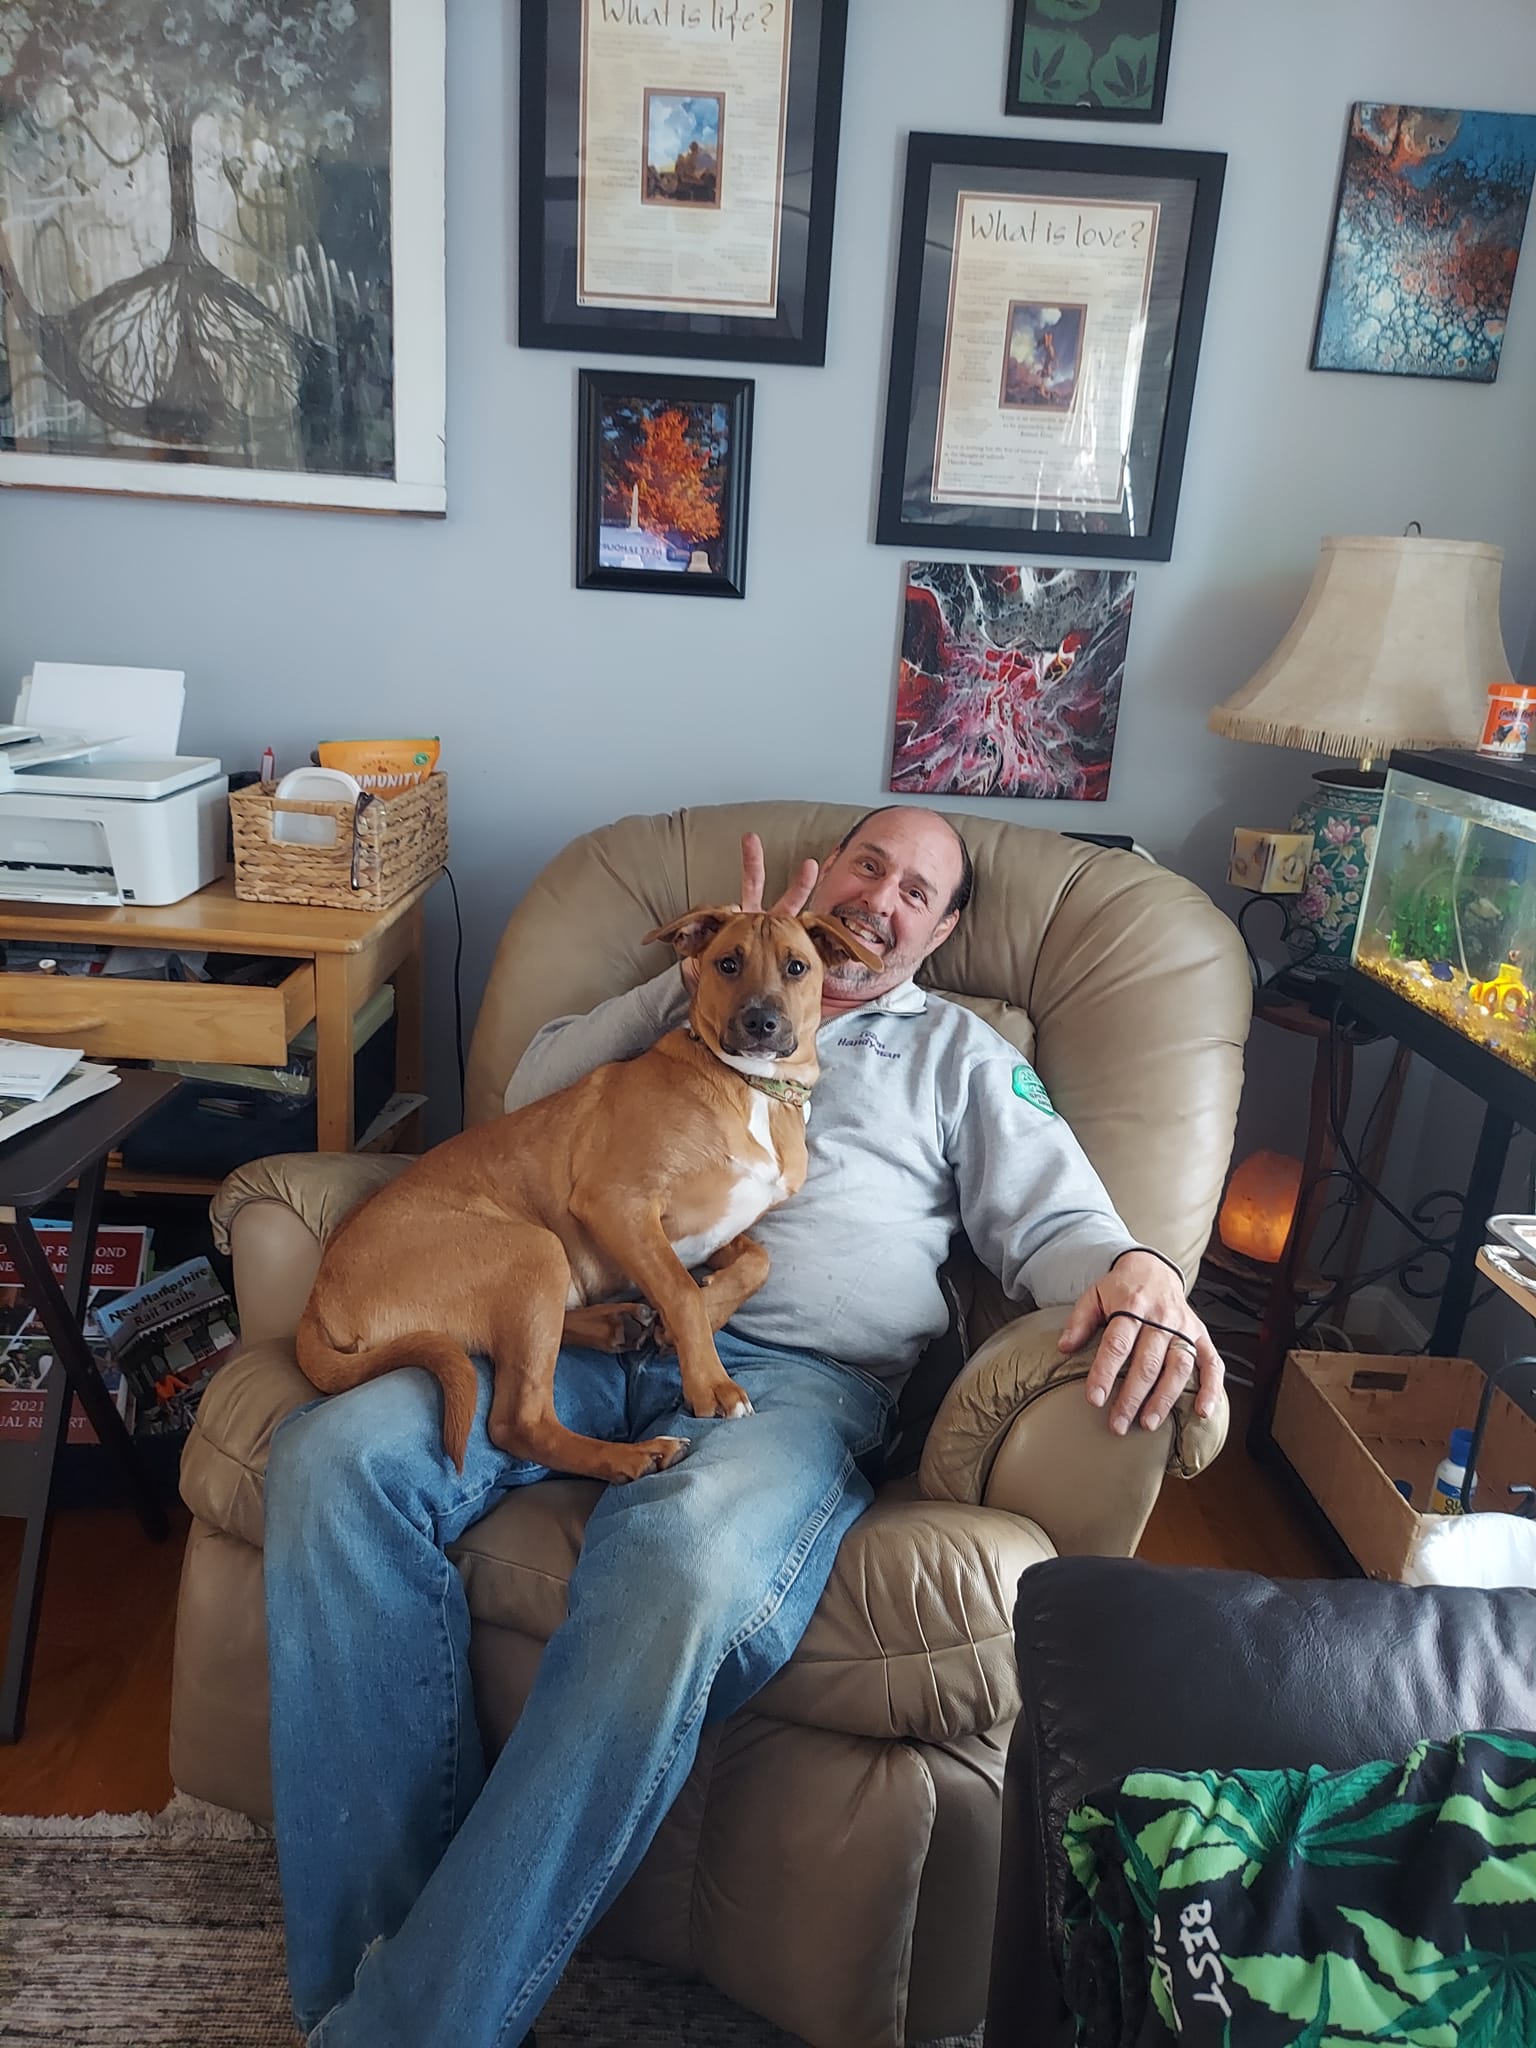 Jason having quality time with his dog, Artie